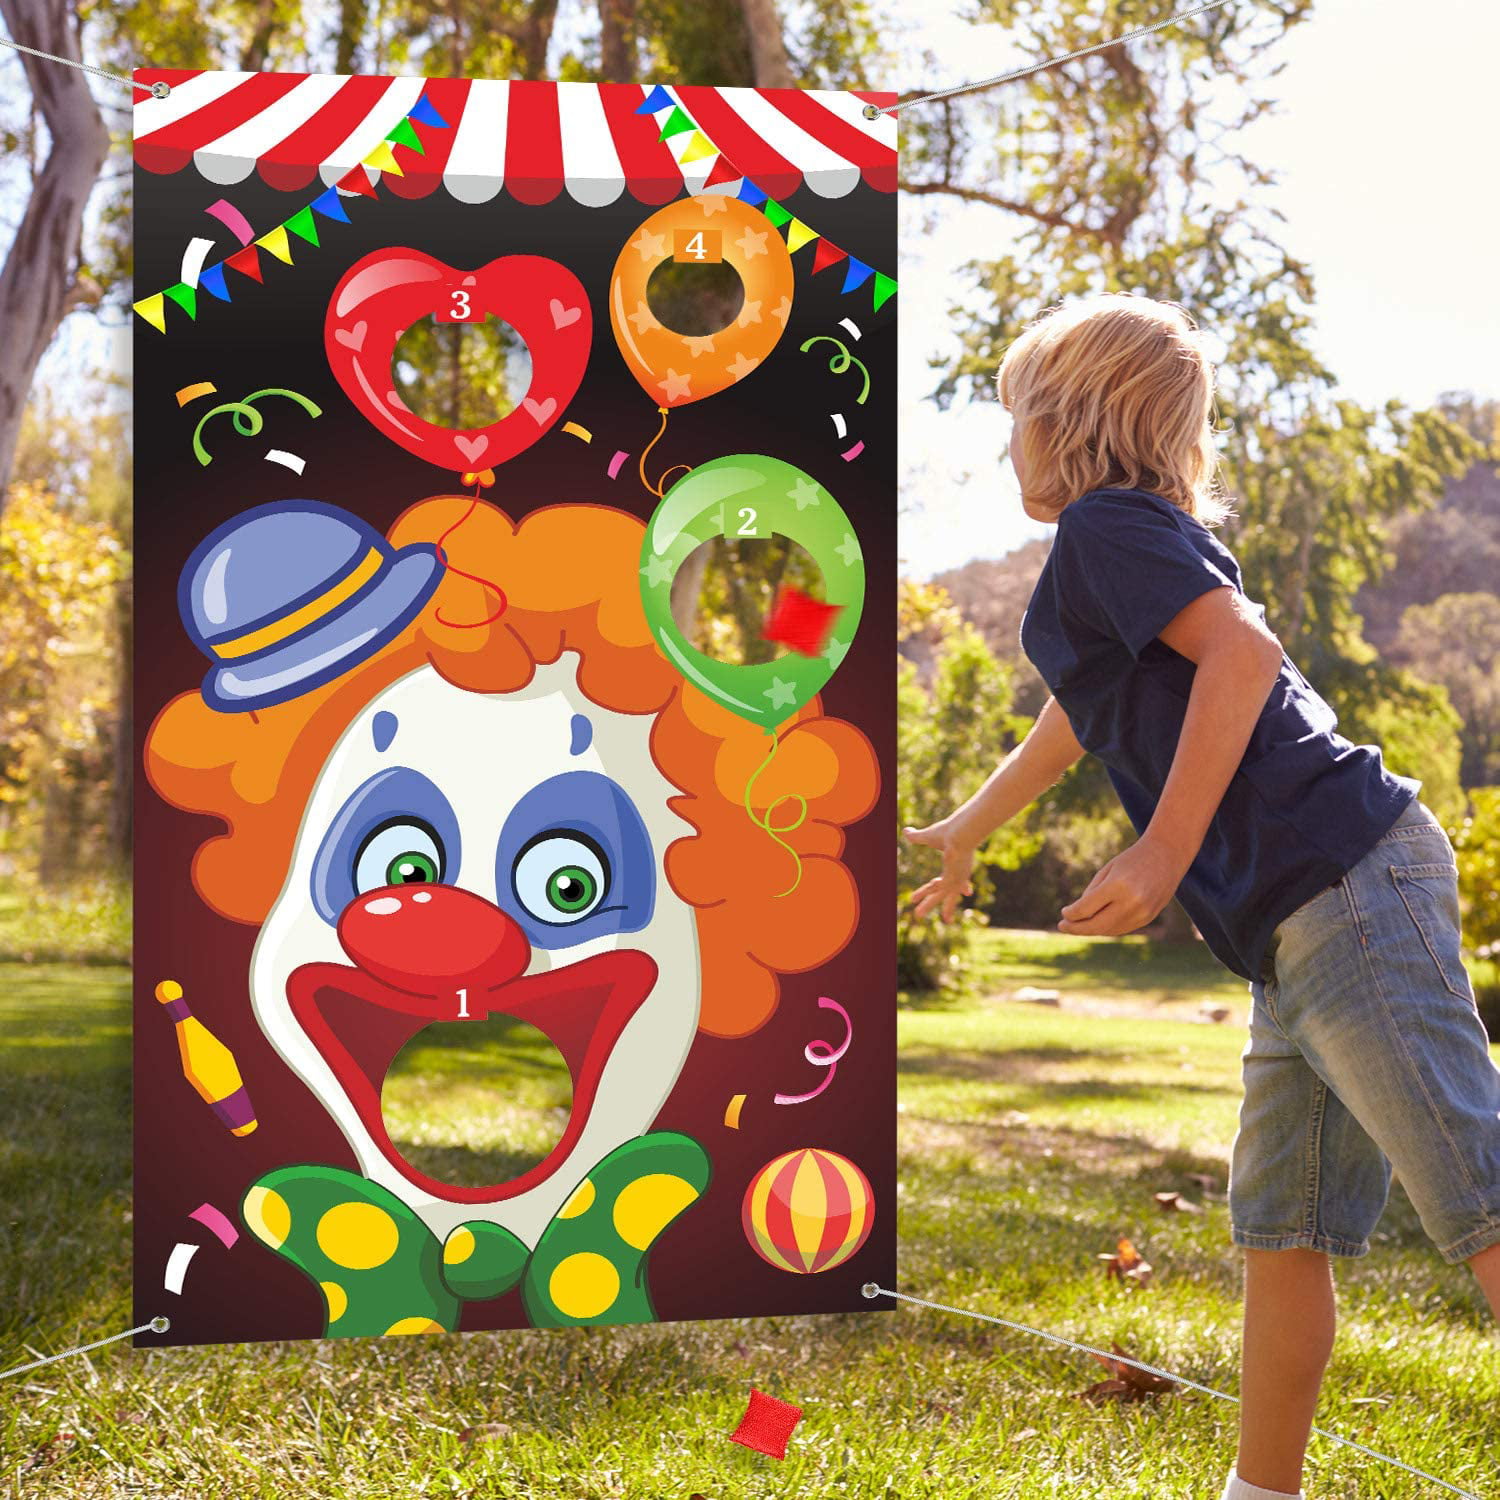 Fun Carnival Game for Kids and Adults in Ca Carnival Toss Games with 3 Bean Bag 